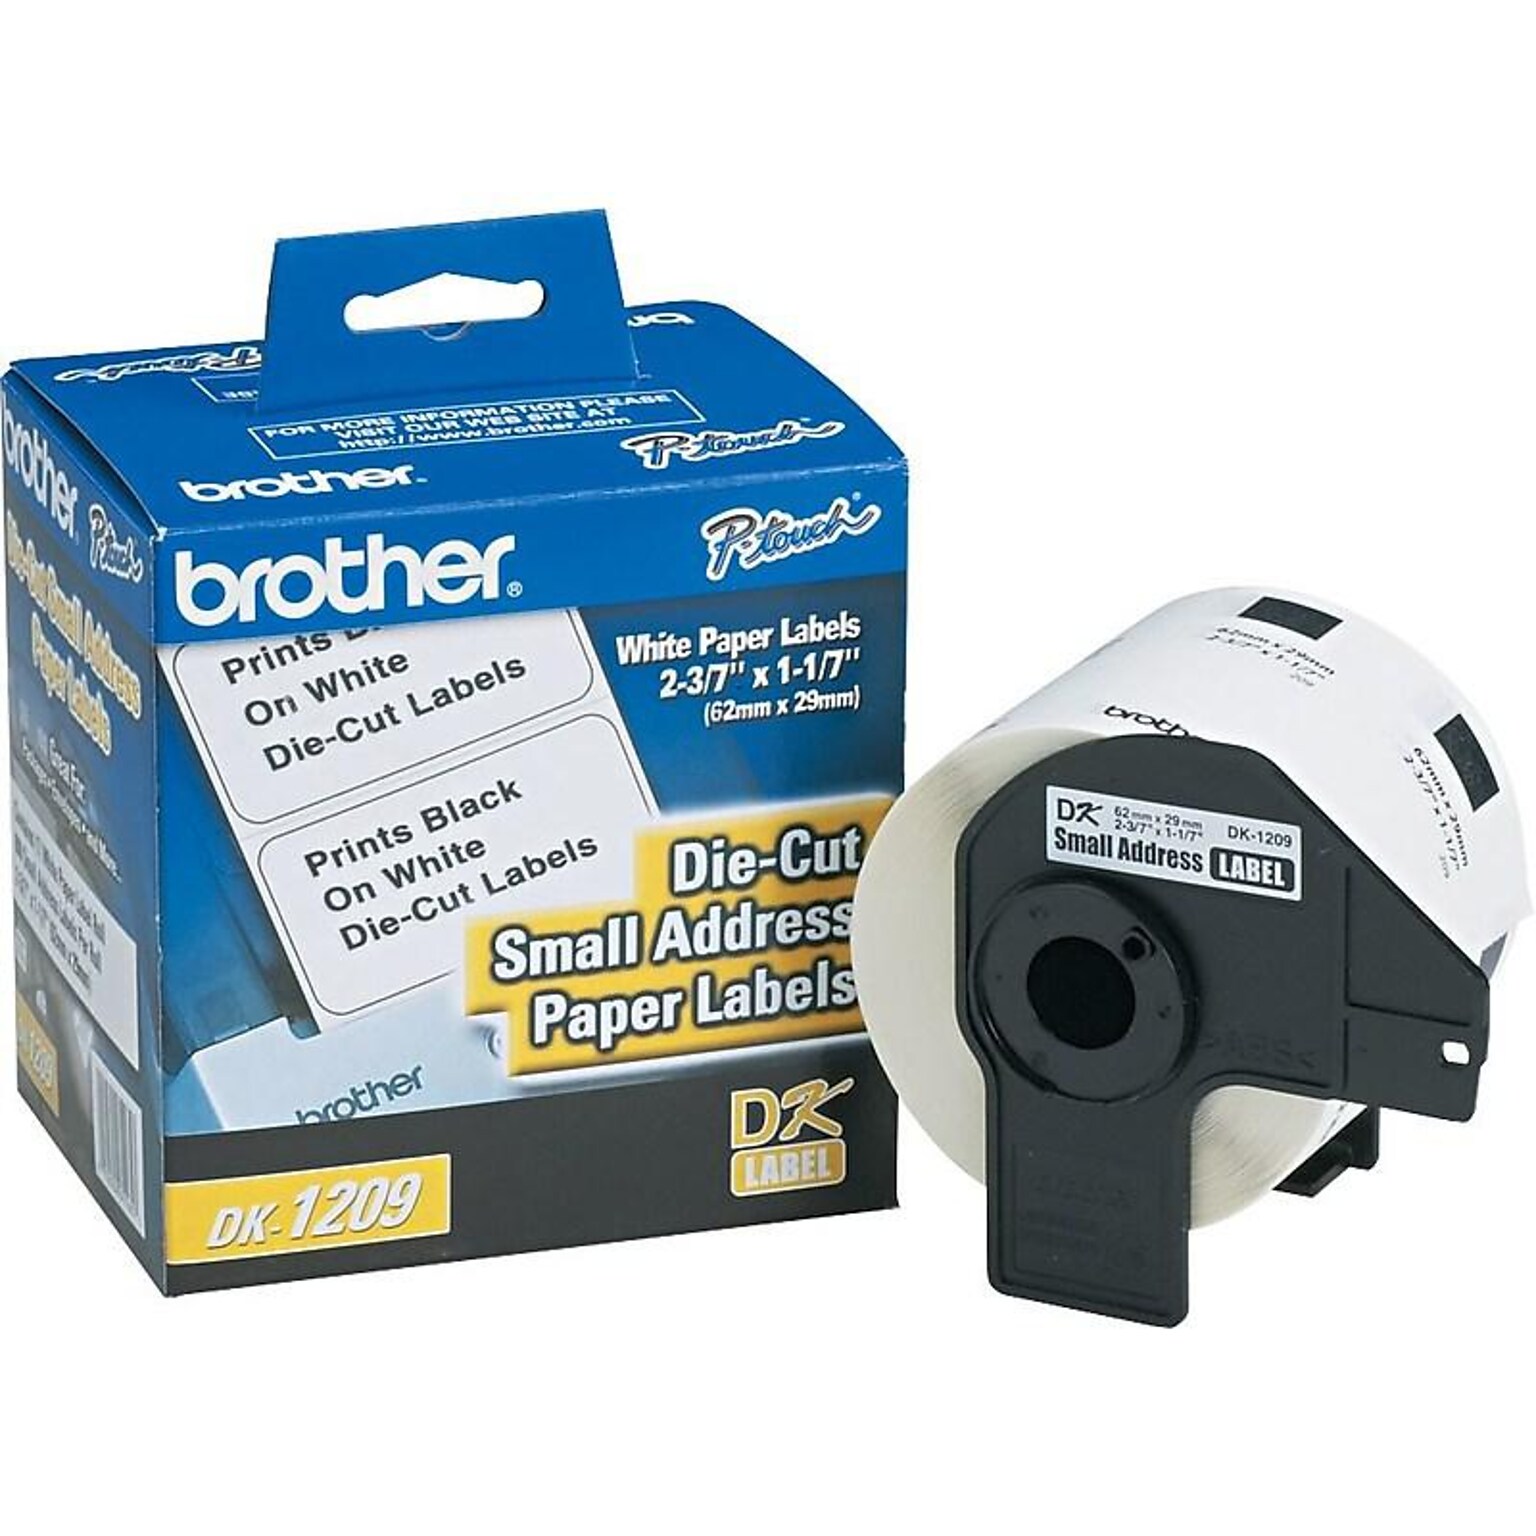 Brother DK-1209 Small Address Paper Labels, 2-4/10 x 1-1/10, Black on White, 800 Labels/Roll (DK-1209)